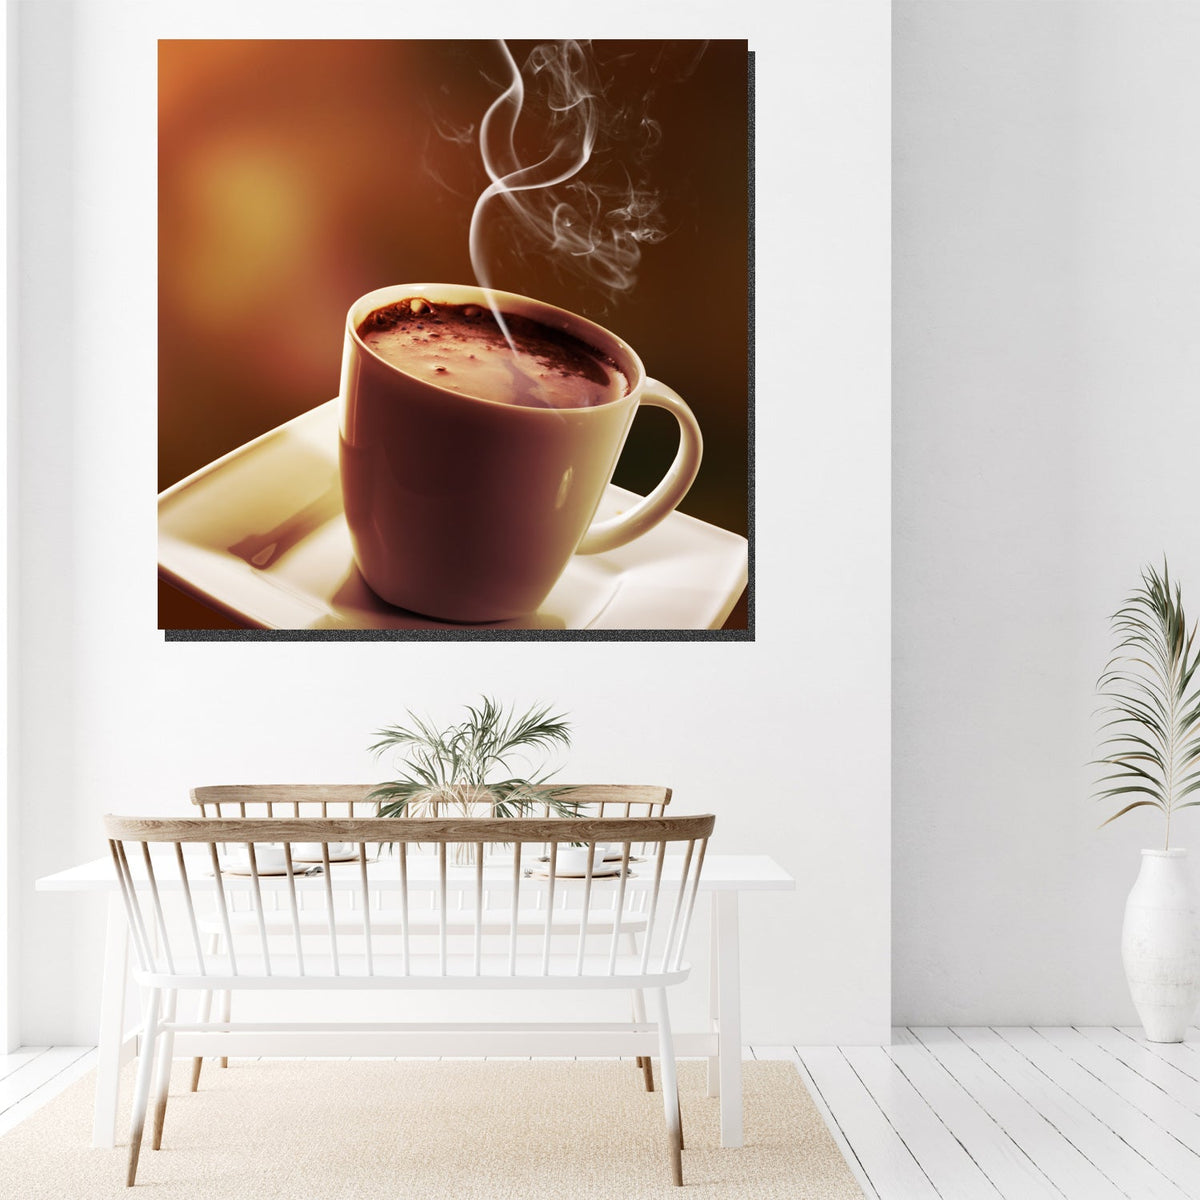 https://cdn.shopify.com/s/files/1/0387/9986/8044/products/CoffeeLoverCanvasArtprintStretched-4.jpg